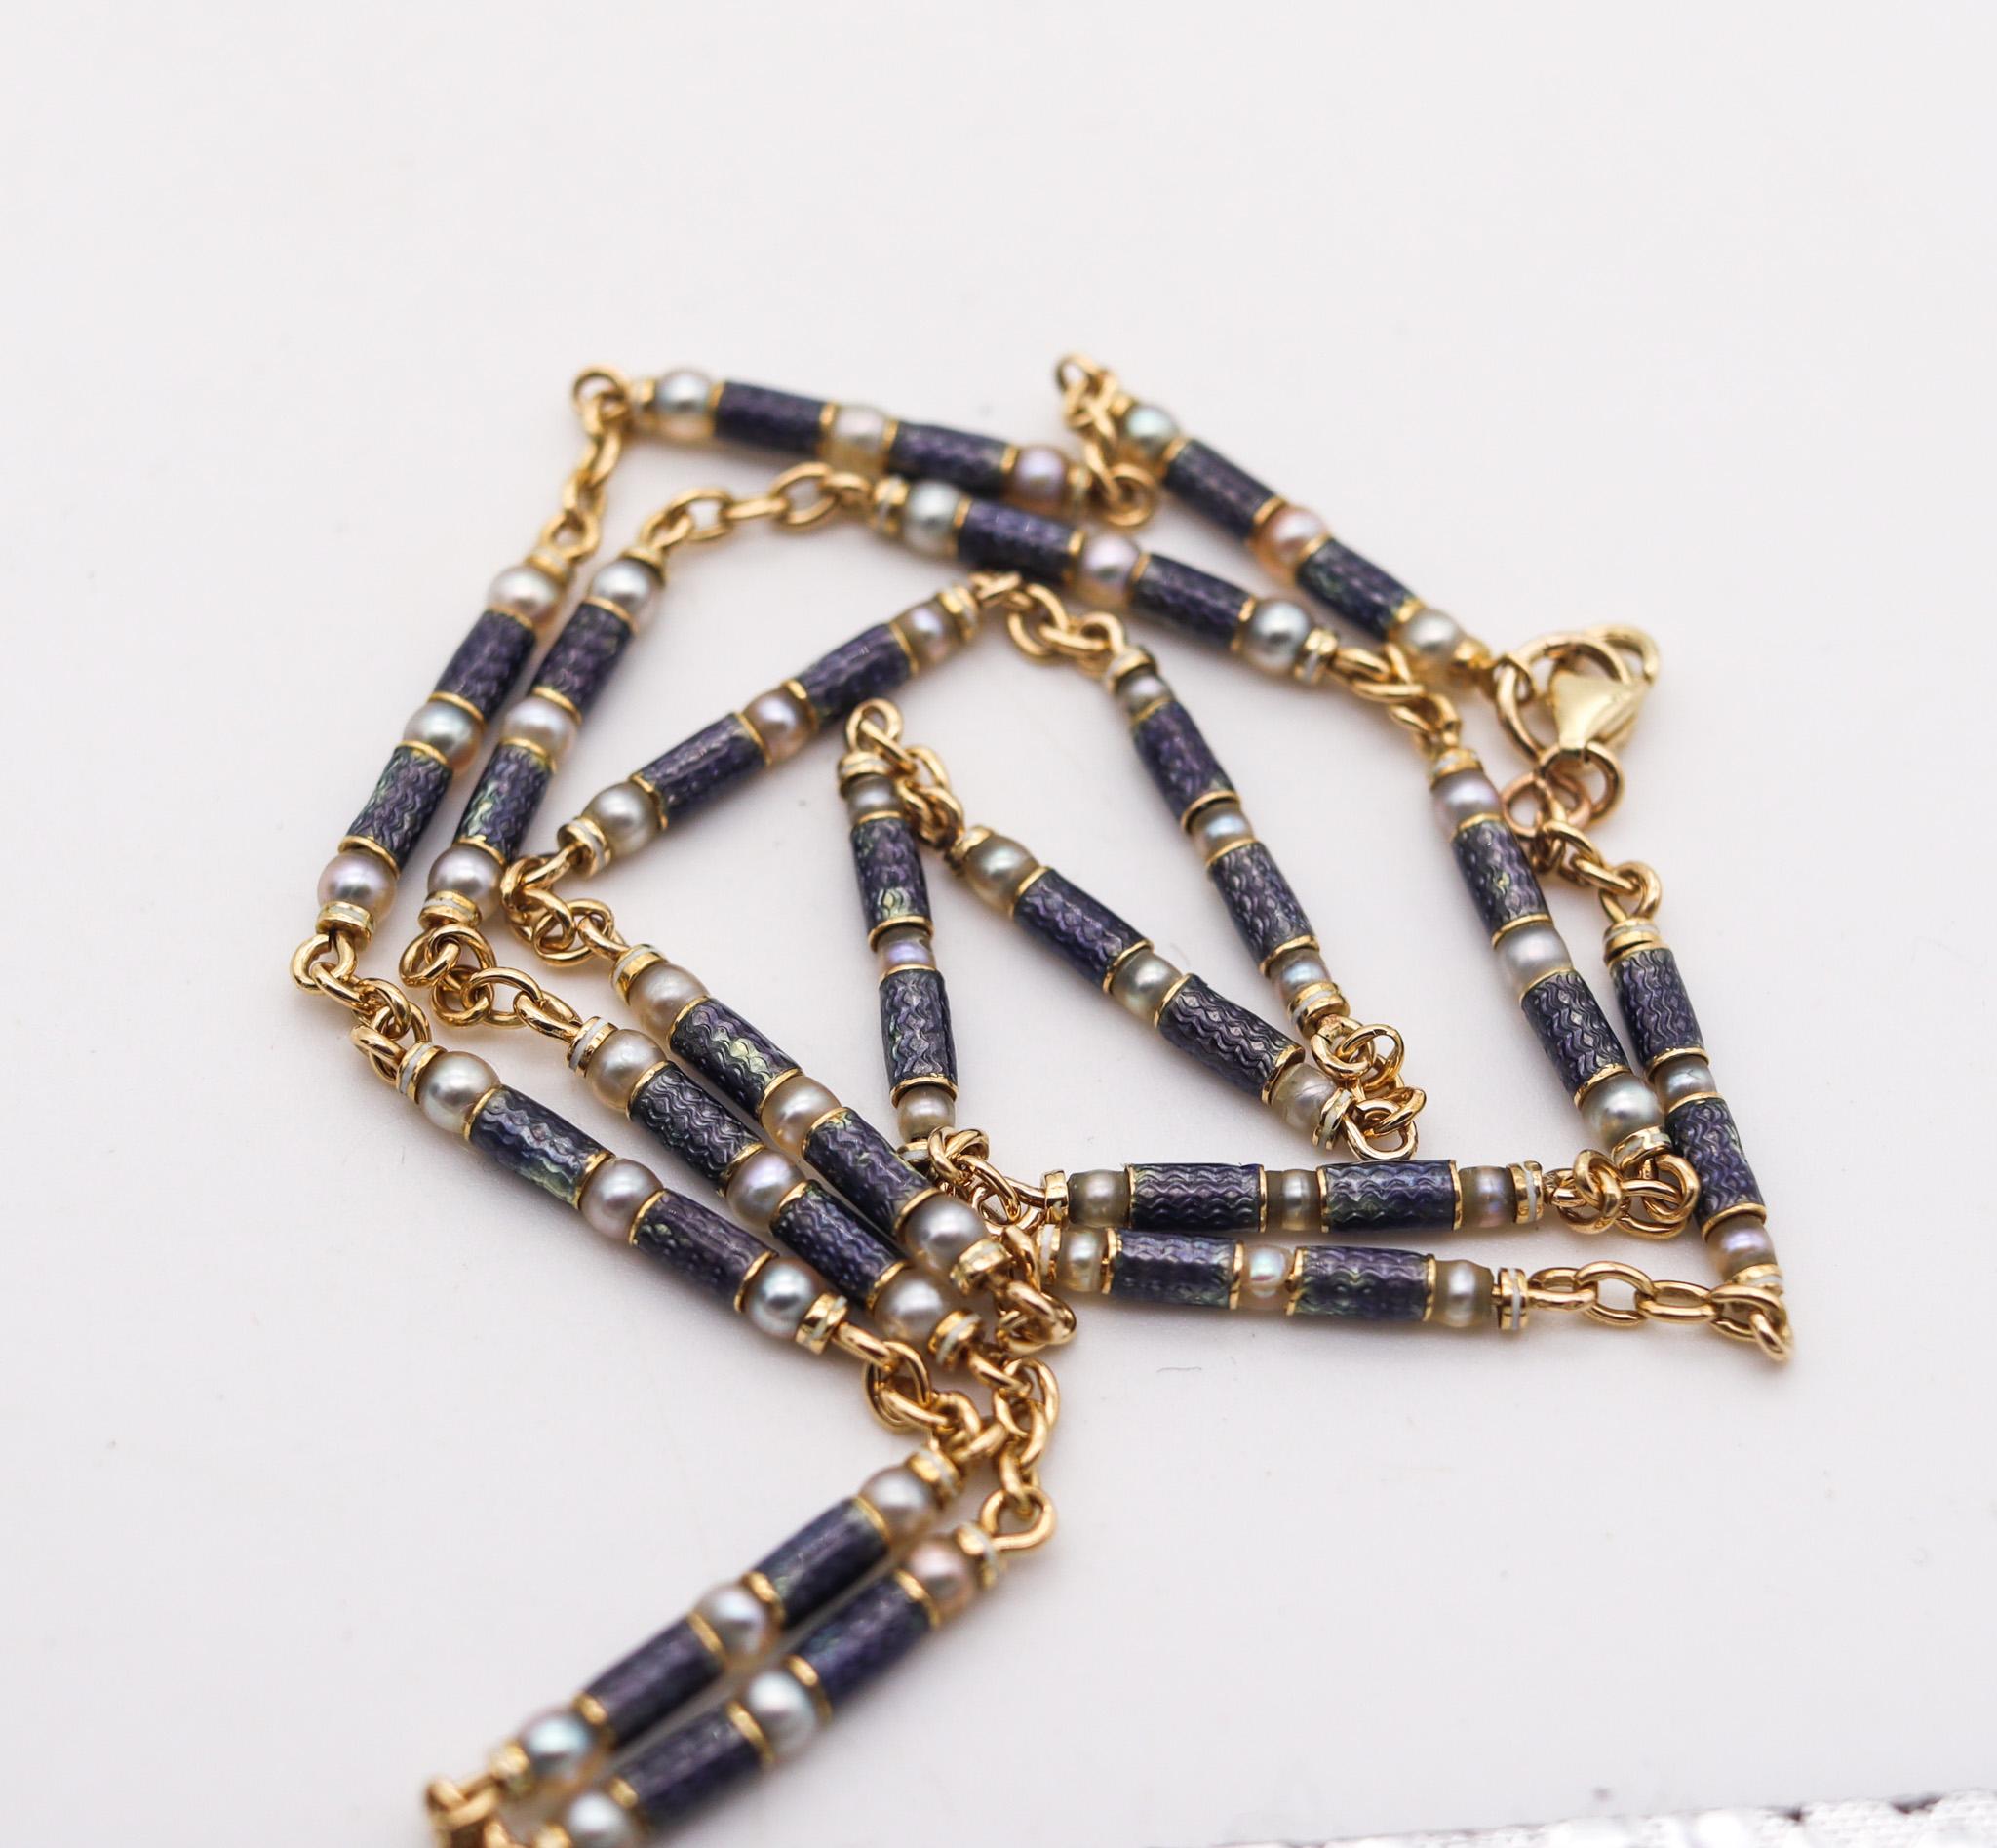 French Edwardian 1900-1905 Pearls Chain In 18Kt Gold With Guilloche Blue Enamel In Excellent Condition For Sale In Miami, FL